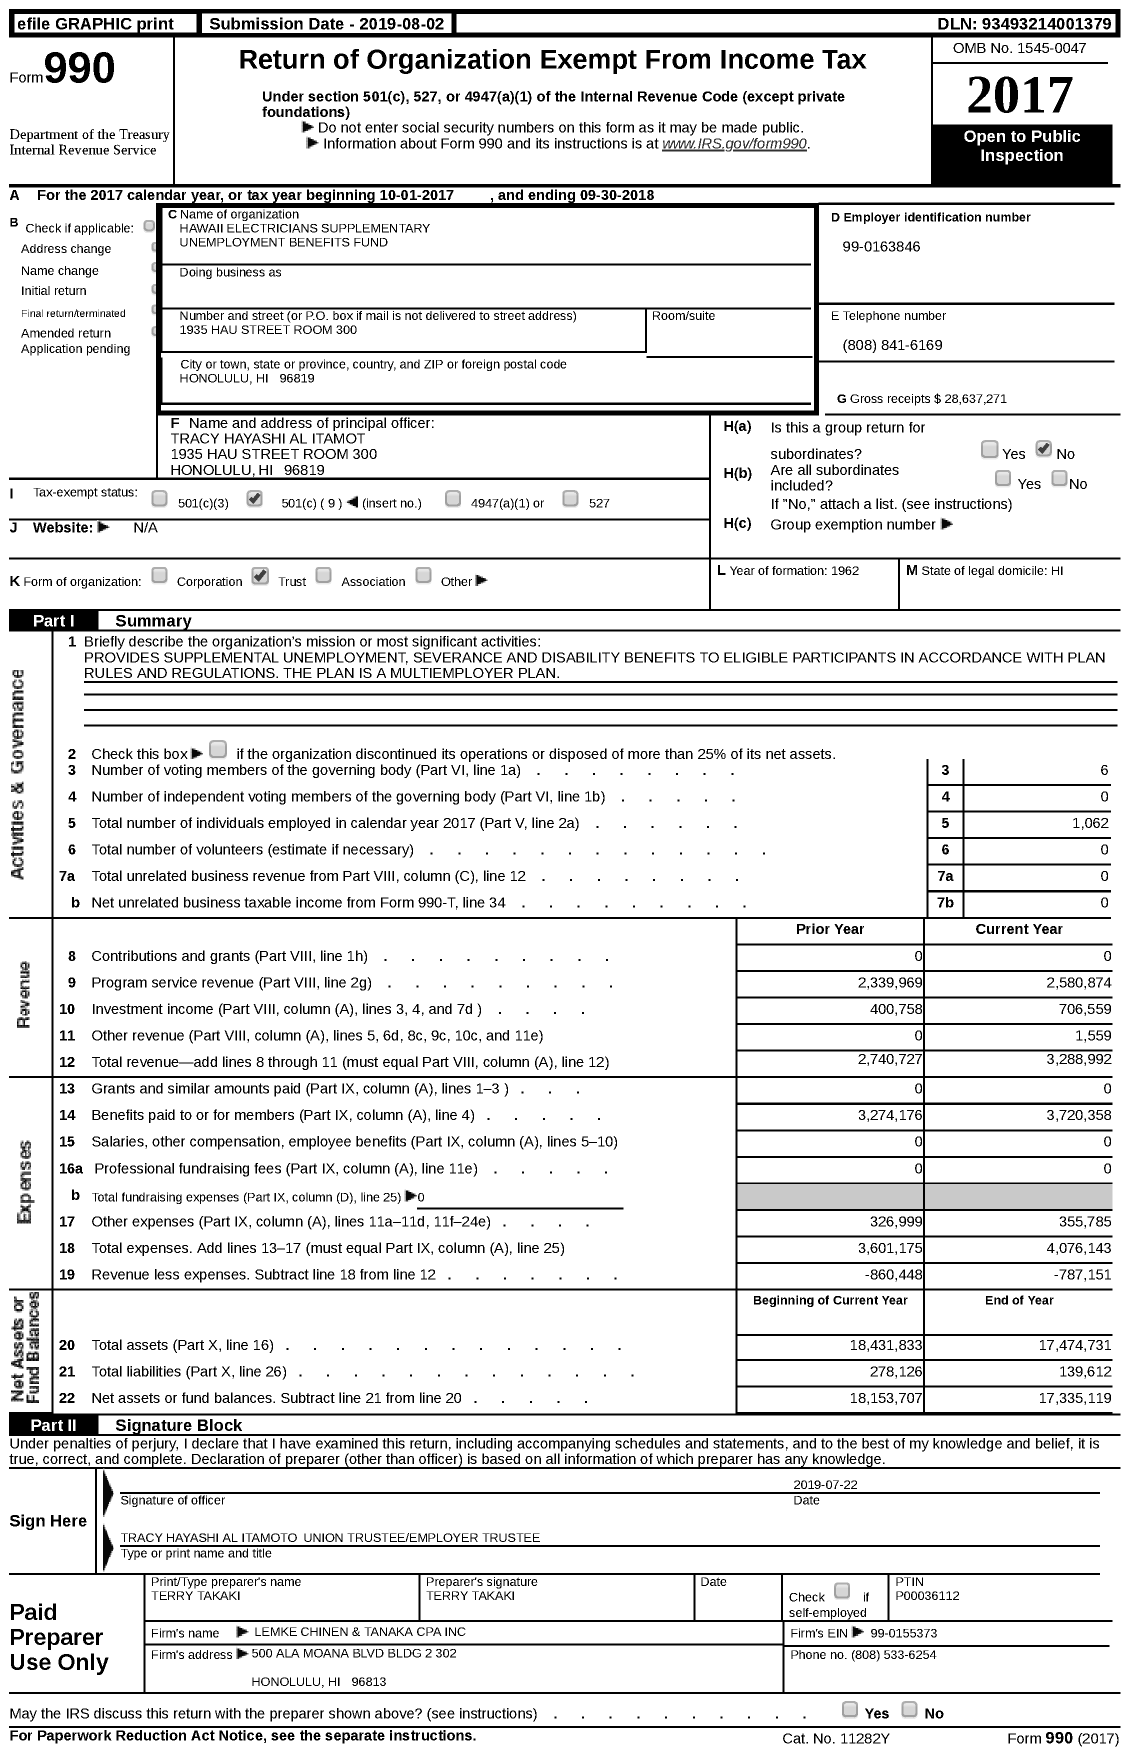 Image of first page of 2017 Form 990 for Hawaii Electricians Supplementary Unemployment Benefits Fund